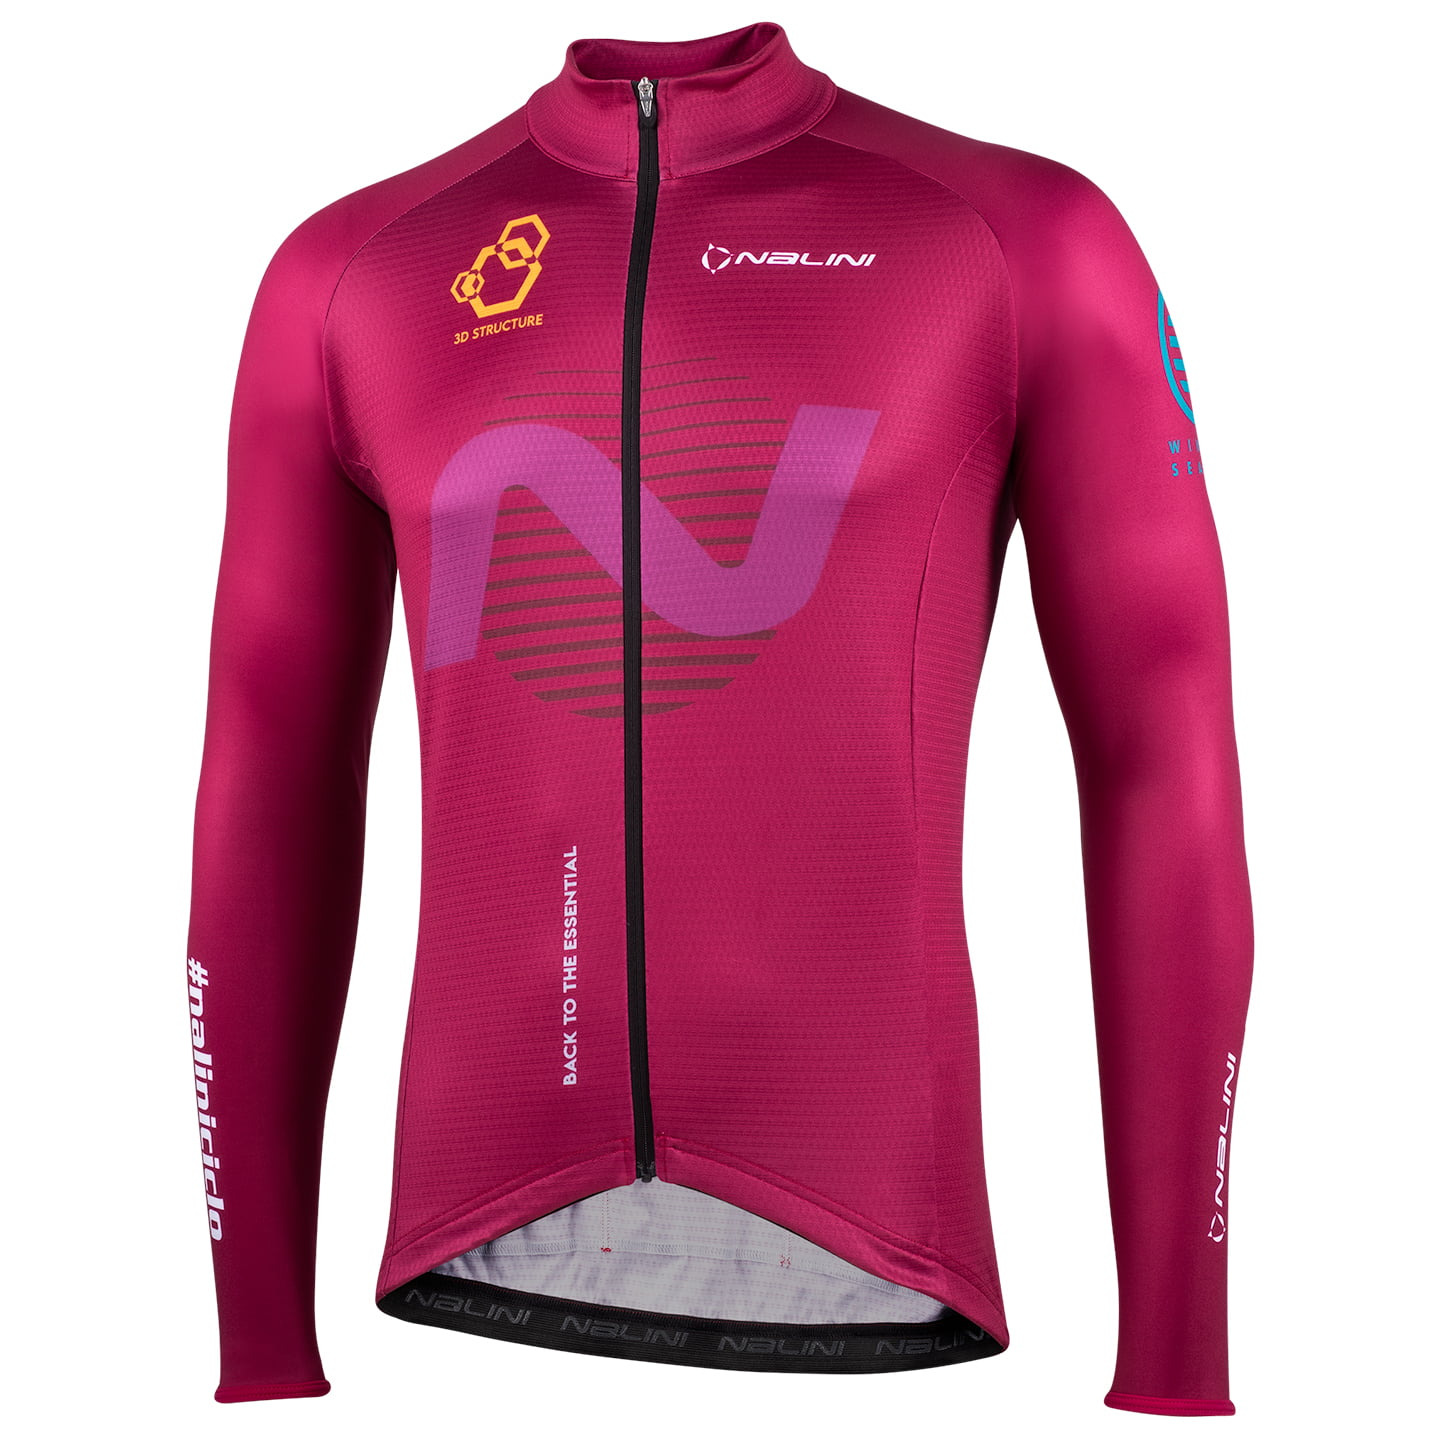 NALINI New Warm Long Sleeve Jersey, for men, size L, Cycling jersey, Cycling clothing